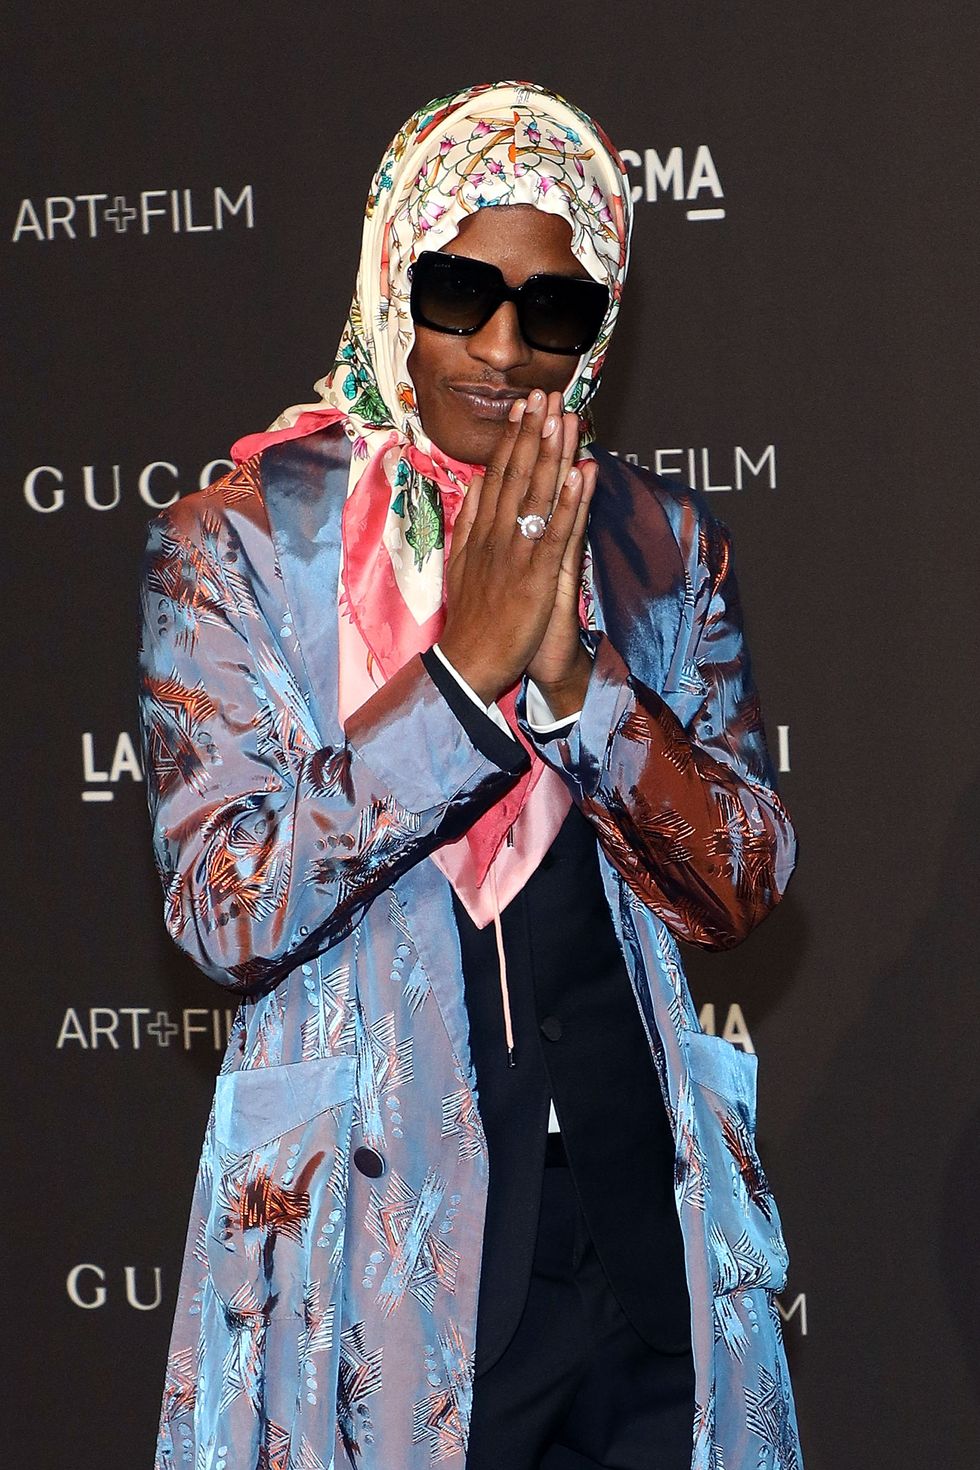 Rocky Wore Gucci Scarf, So Now I Need a Grandma Scarf